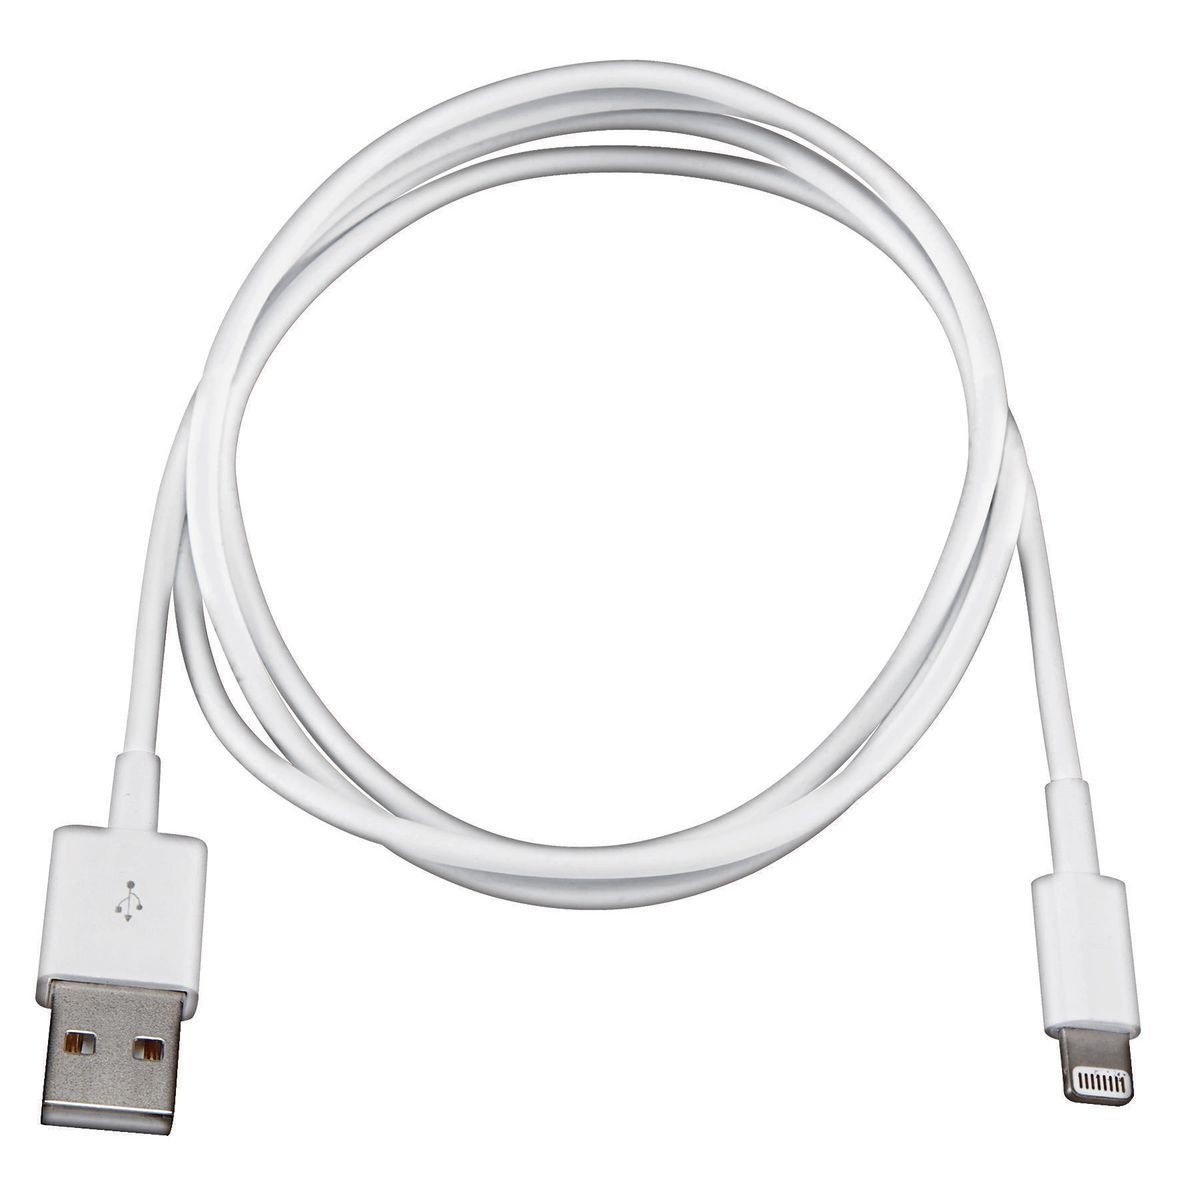 3-Foot USB 3.0 Micro B Cable